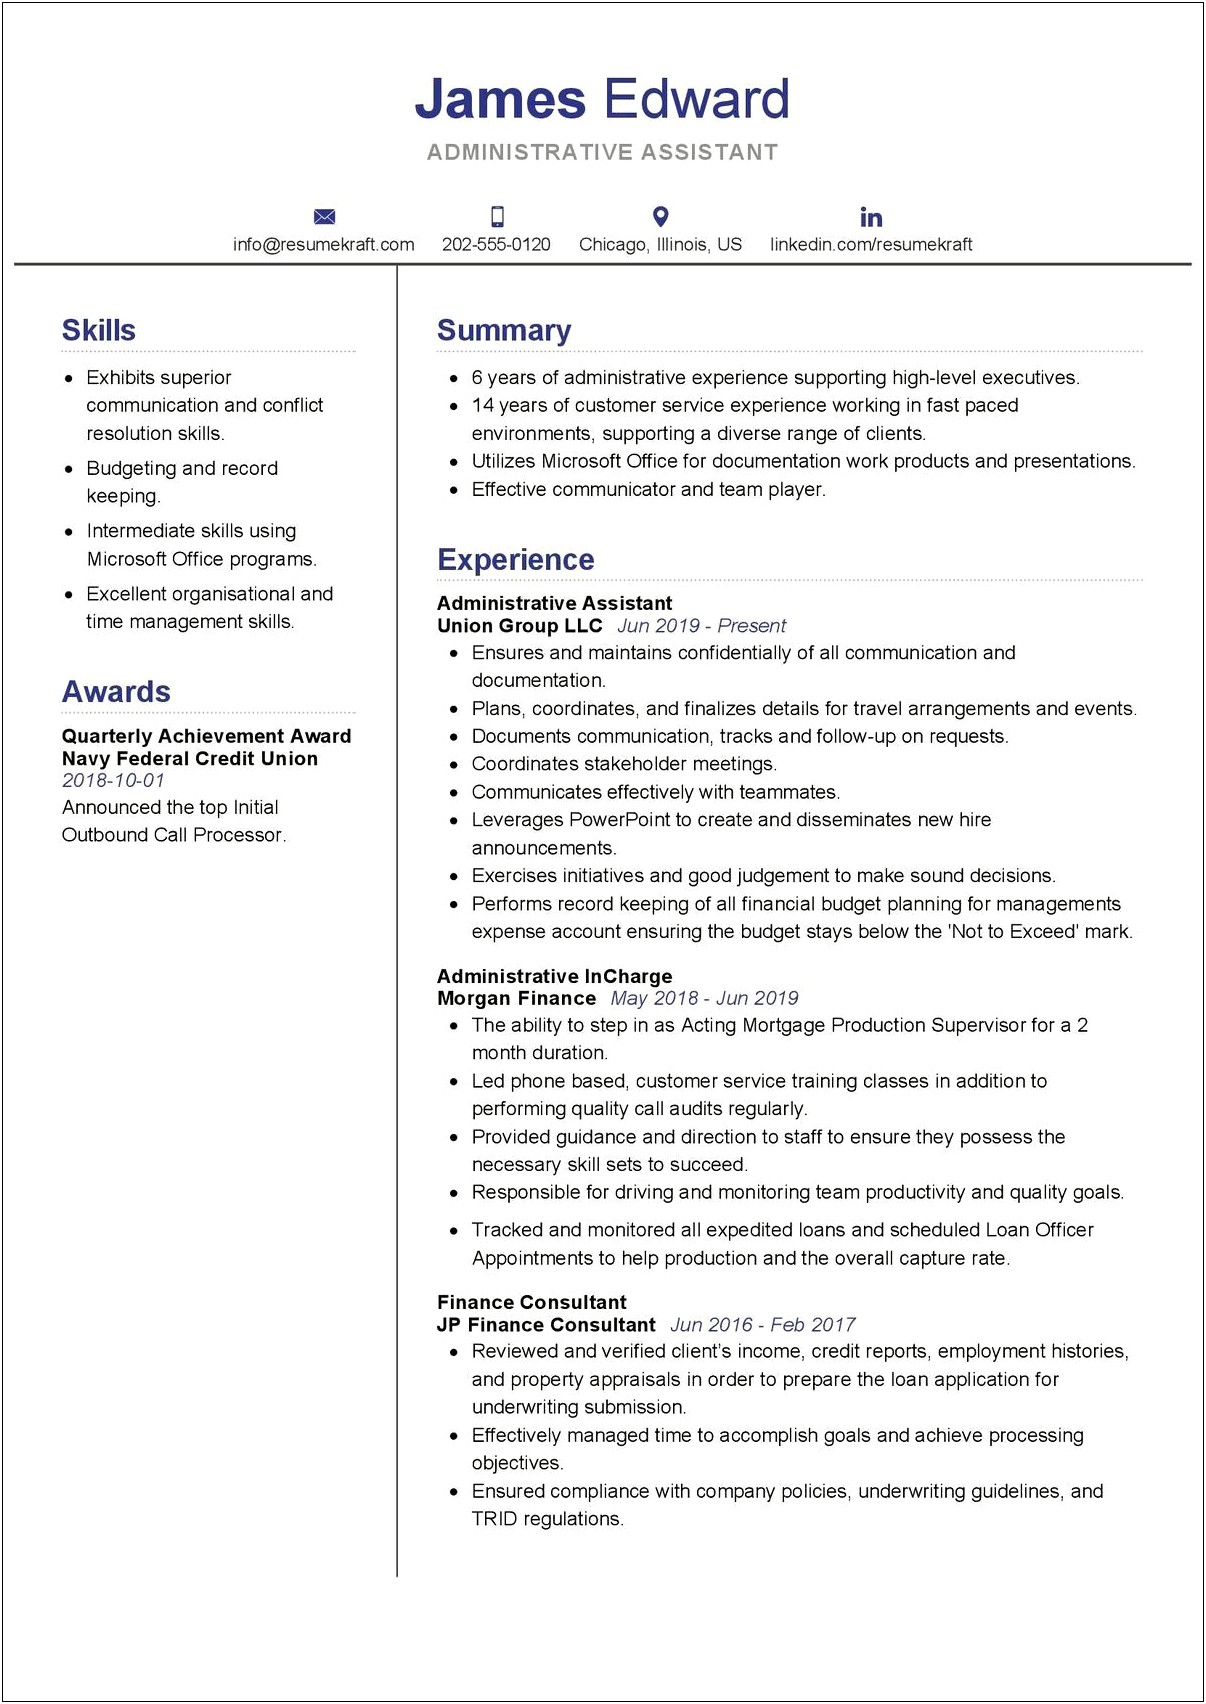 Resume For An Administrative Assistant Job